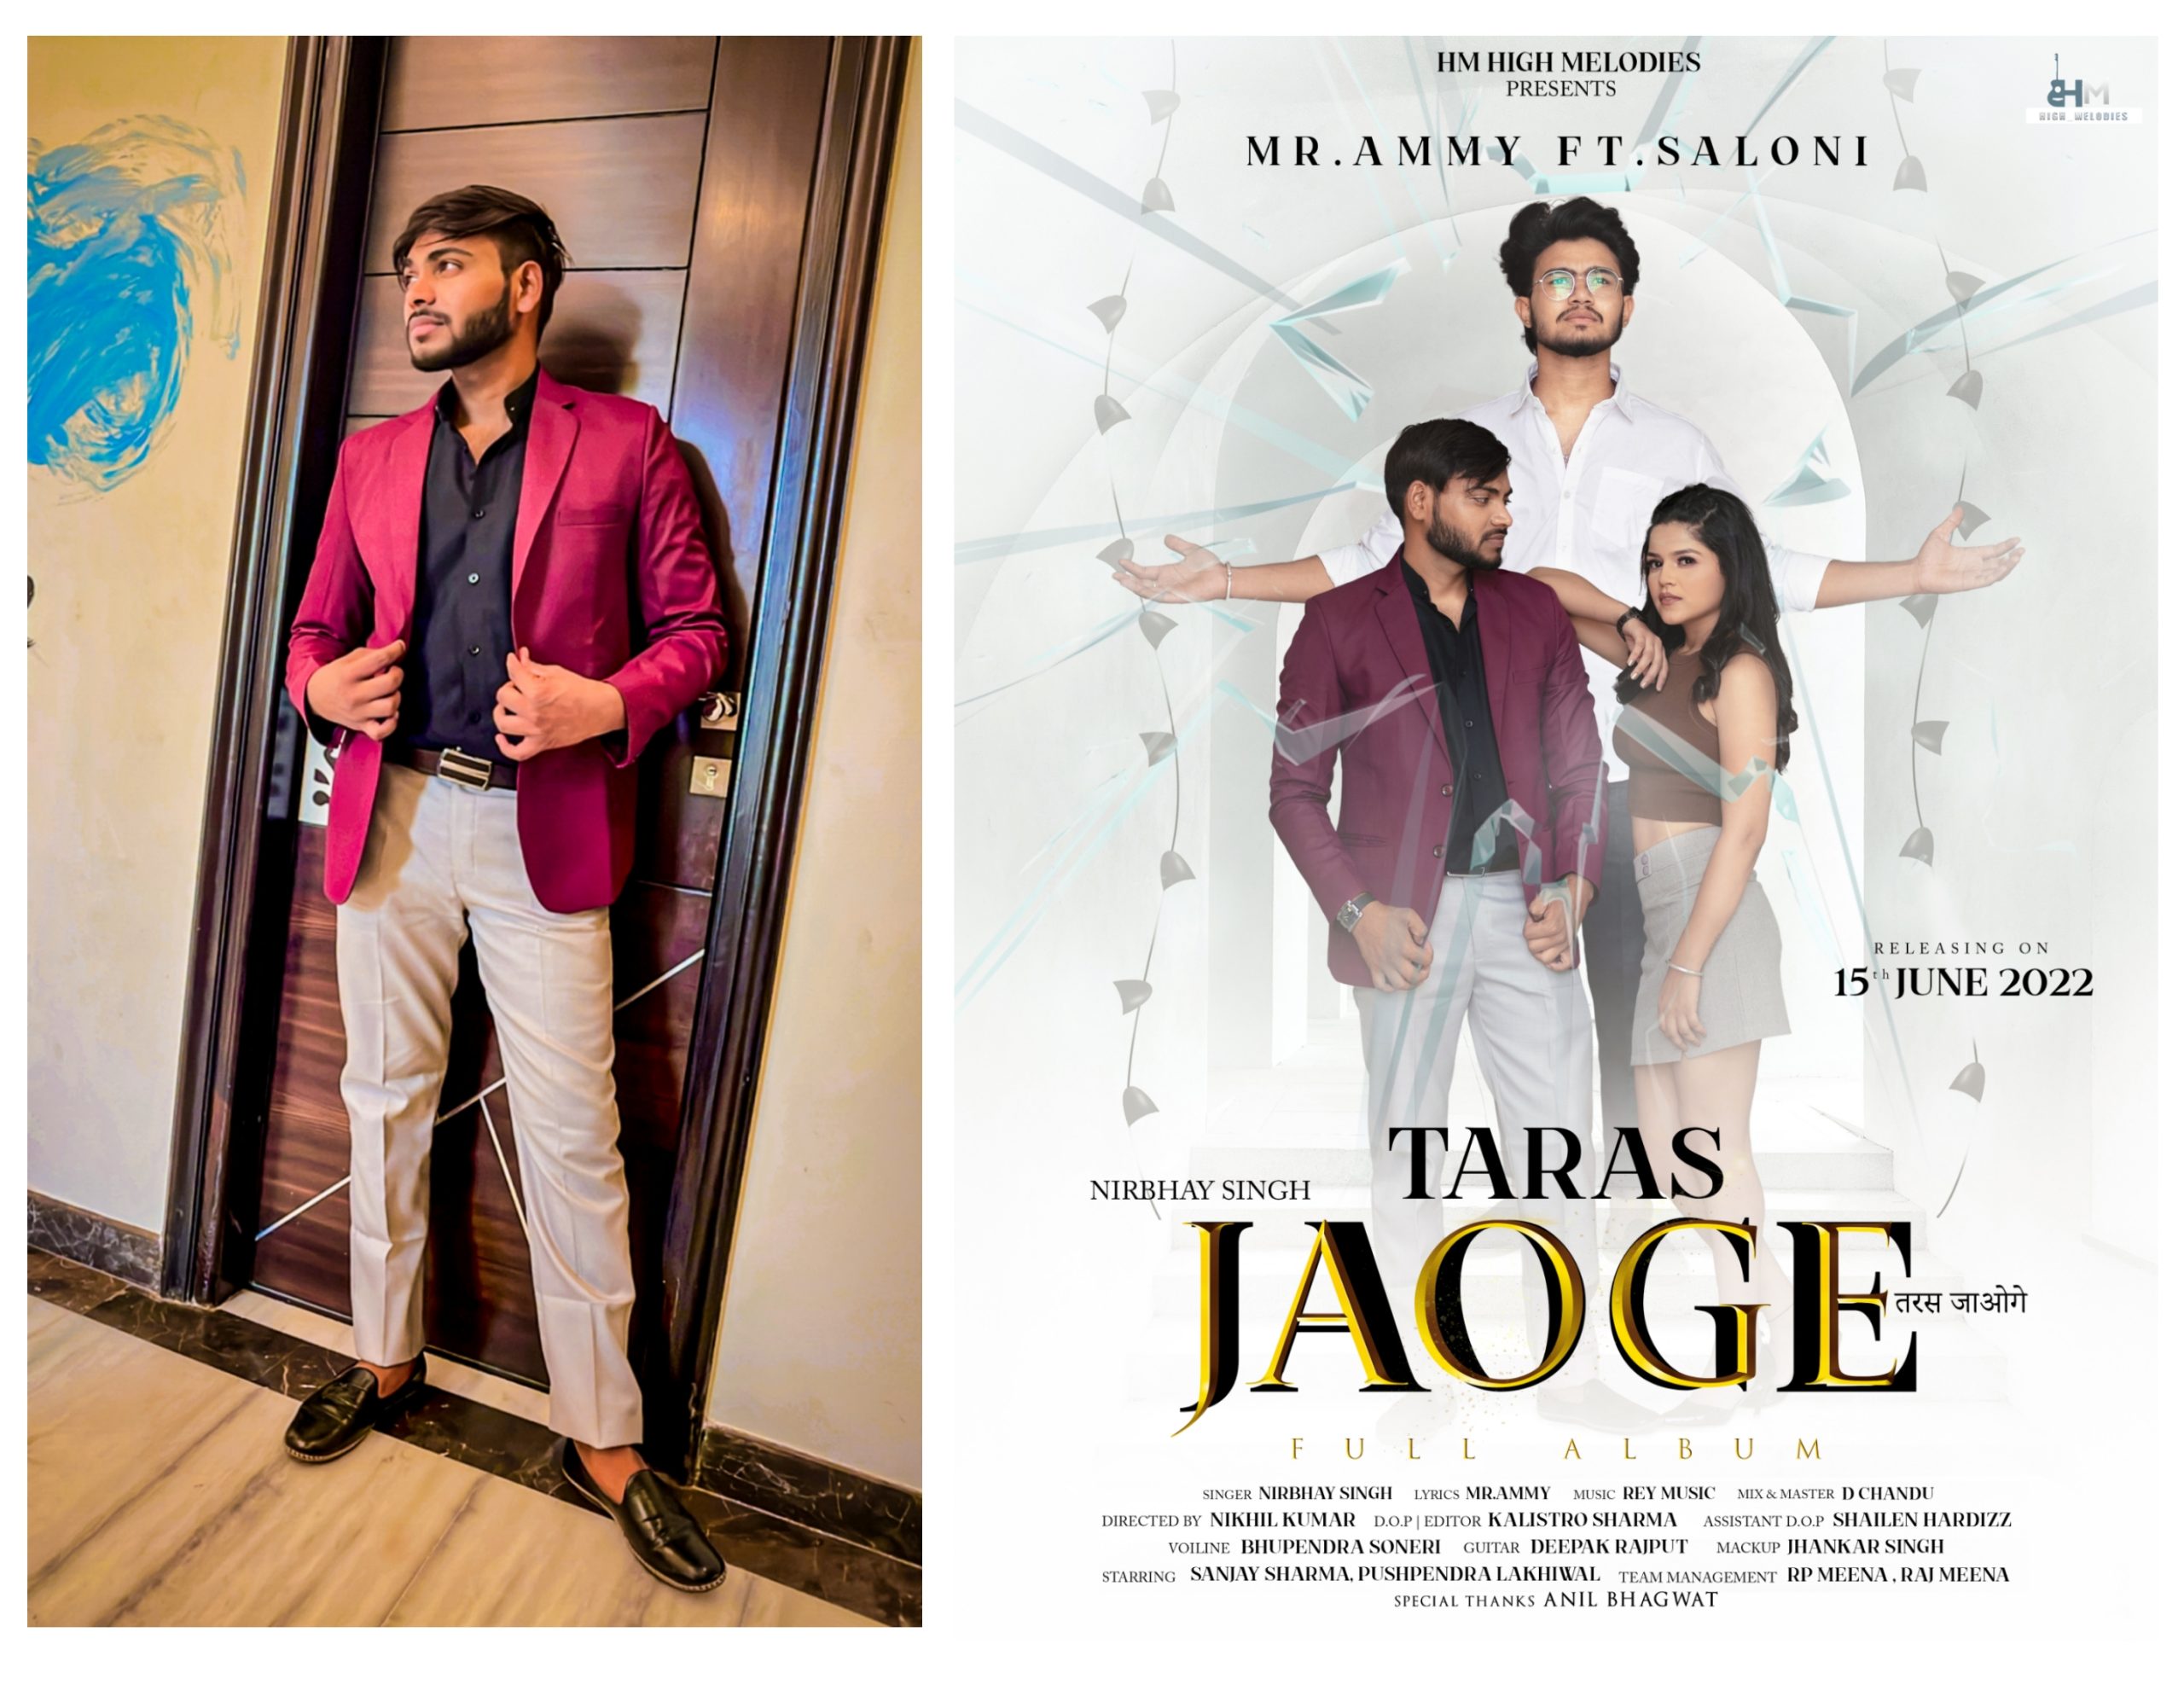 Lyricist Ammy going to debut his 1st ever love story music album “taras jaoge”